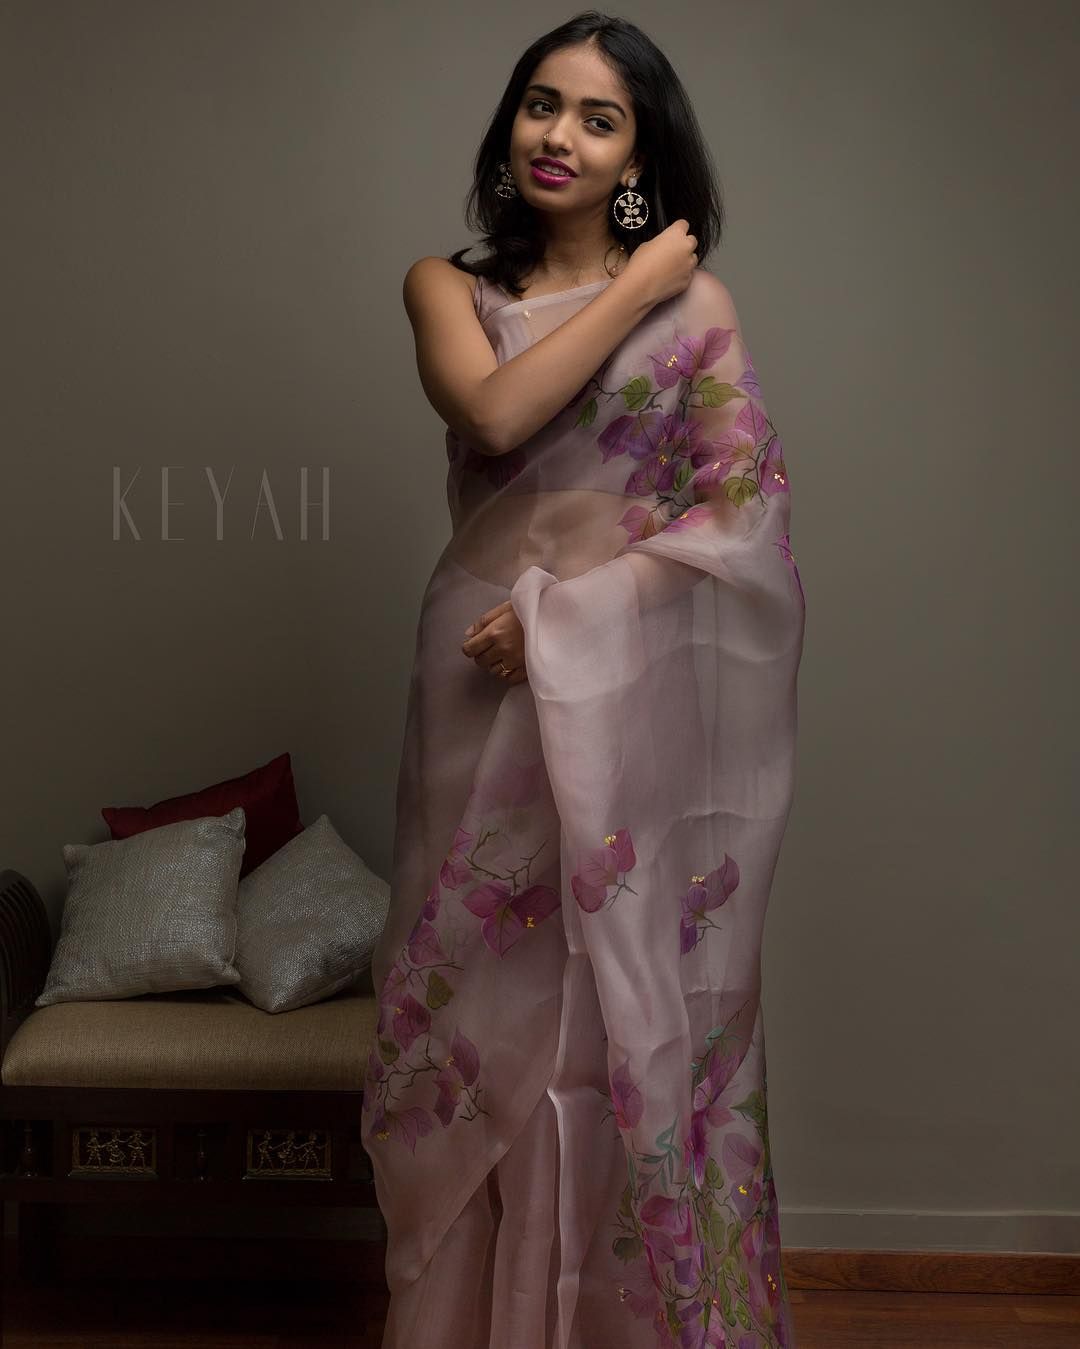 Floral Fantasy: Embrace Tradition with Floral Sarees